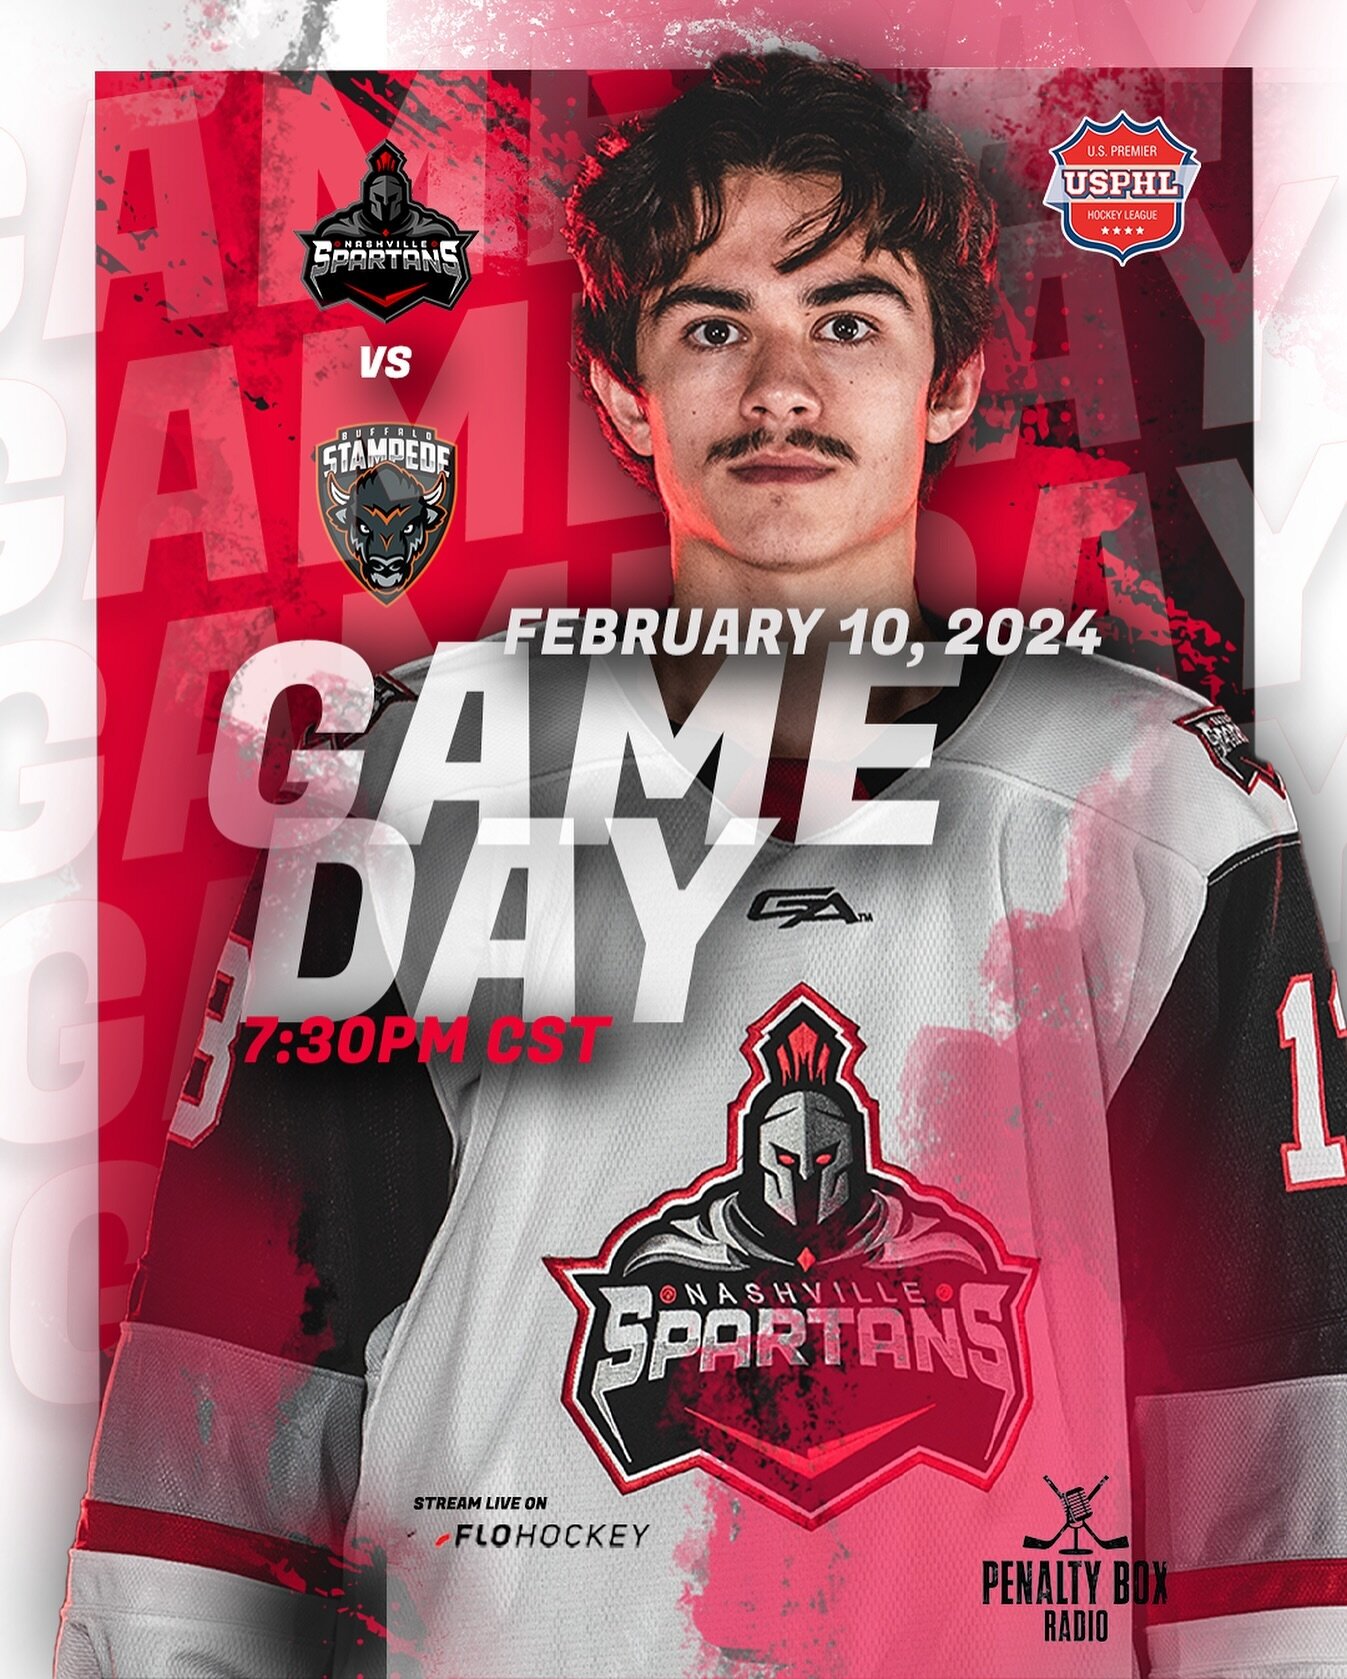 ⚔️⚔️⚔️⚔️GAMEDAY!⚔️⚔️⚔️⚔️

Spartans are back at home tonight. Catch all the action live at @garyforceacuraicearena or online on @flohockey. 7:30PM CST.